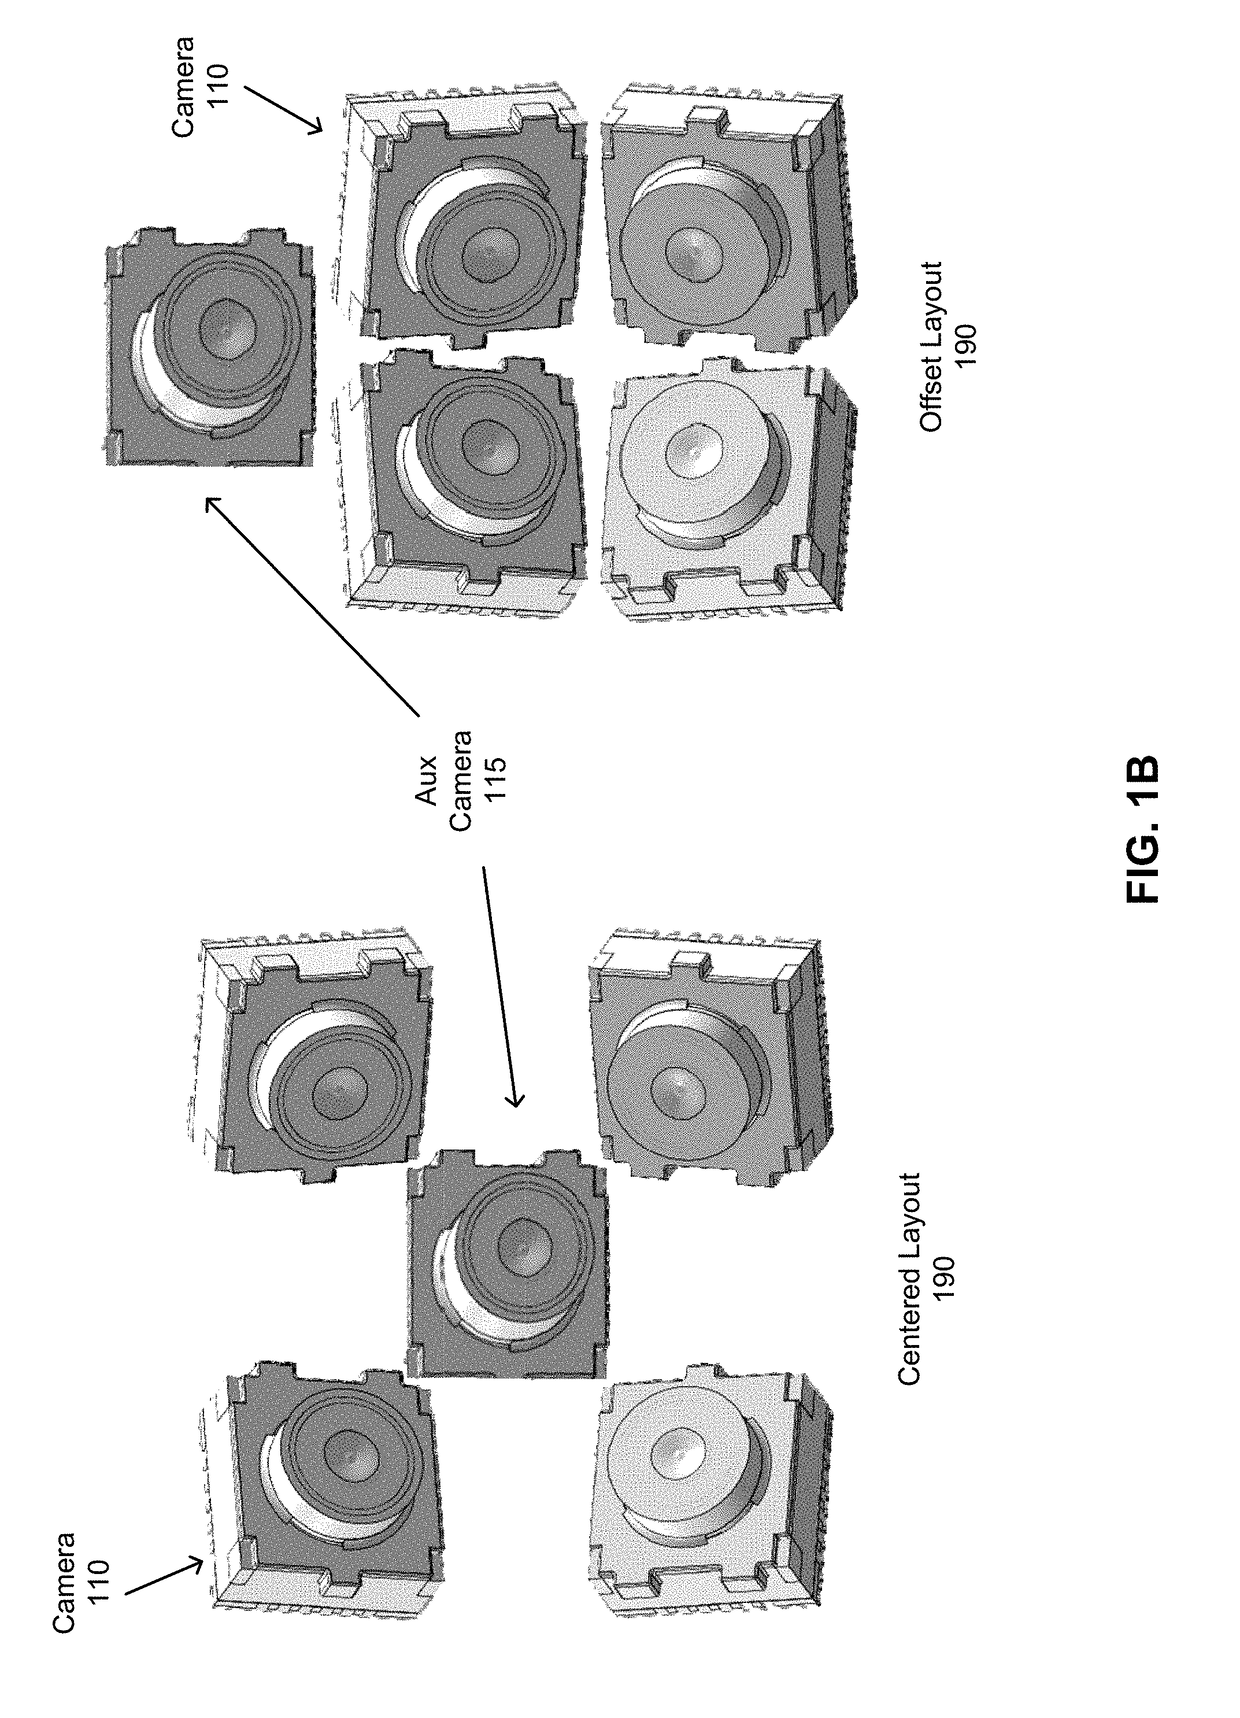 Compact array of imaging devices with supplemental imaging unit